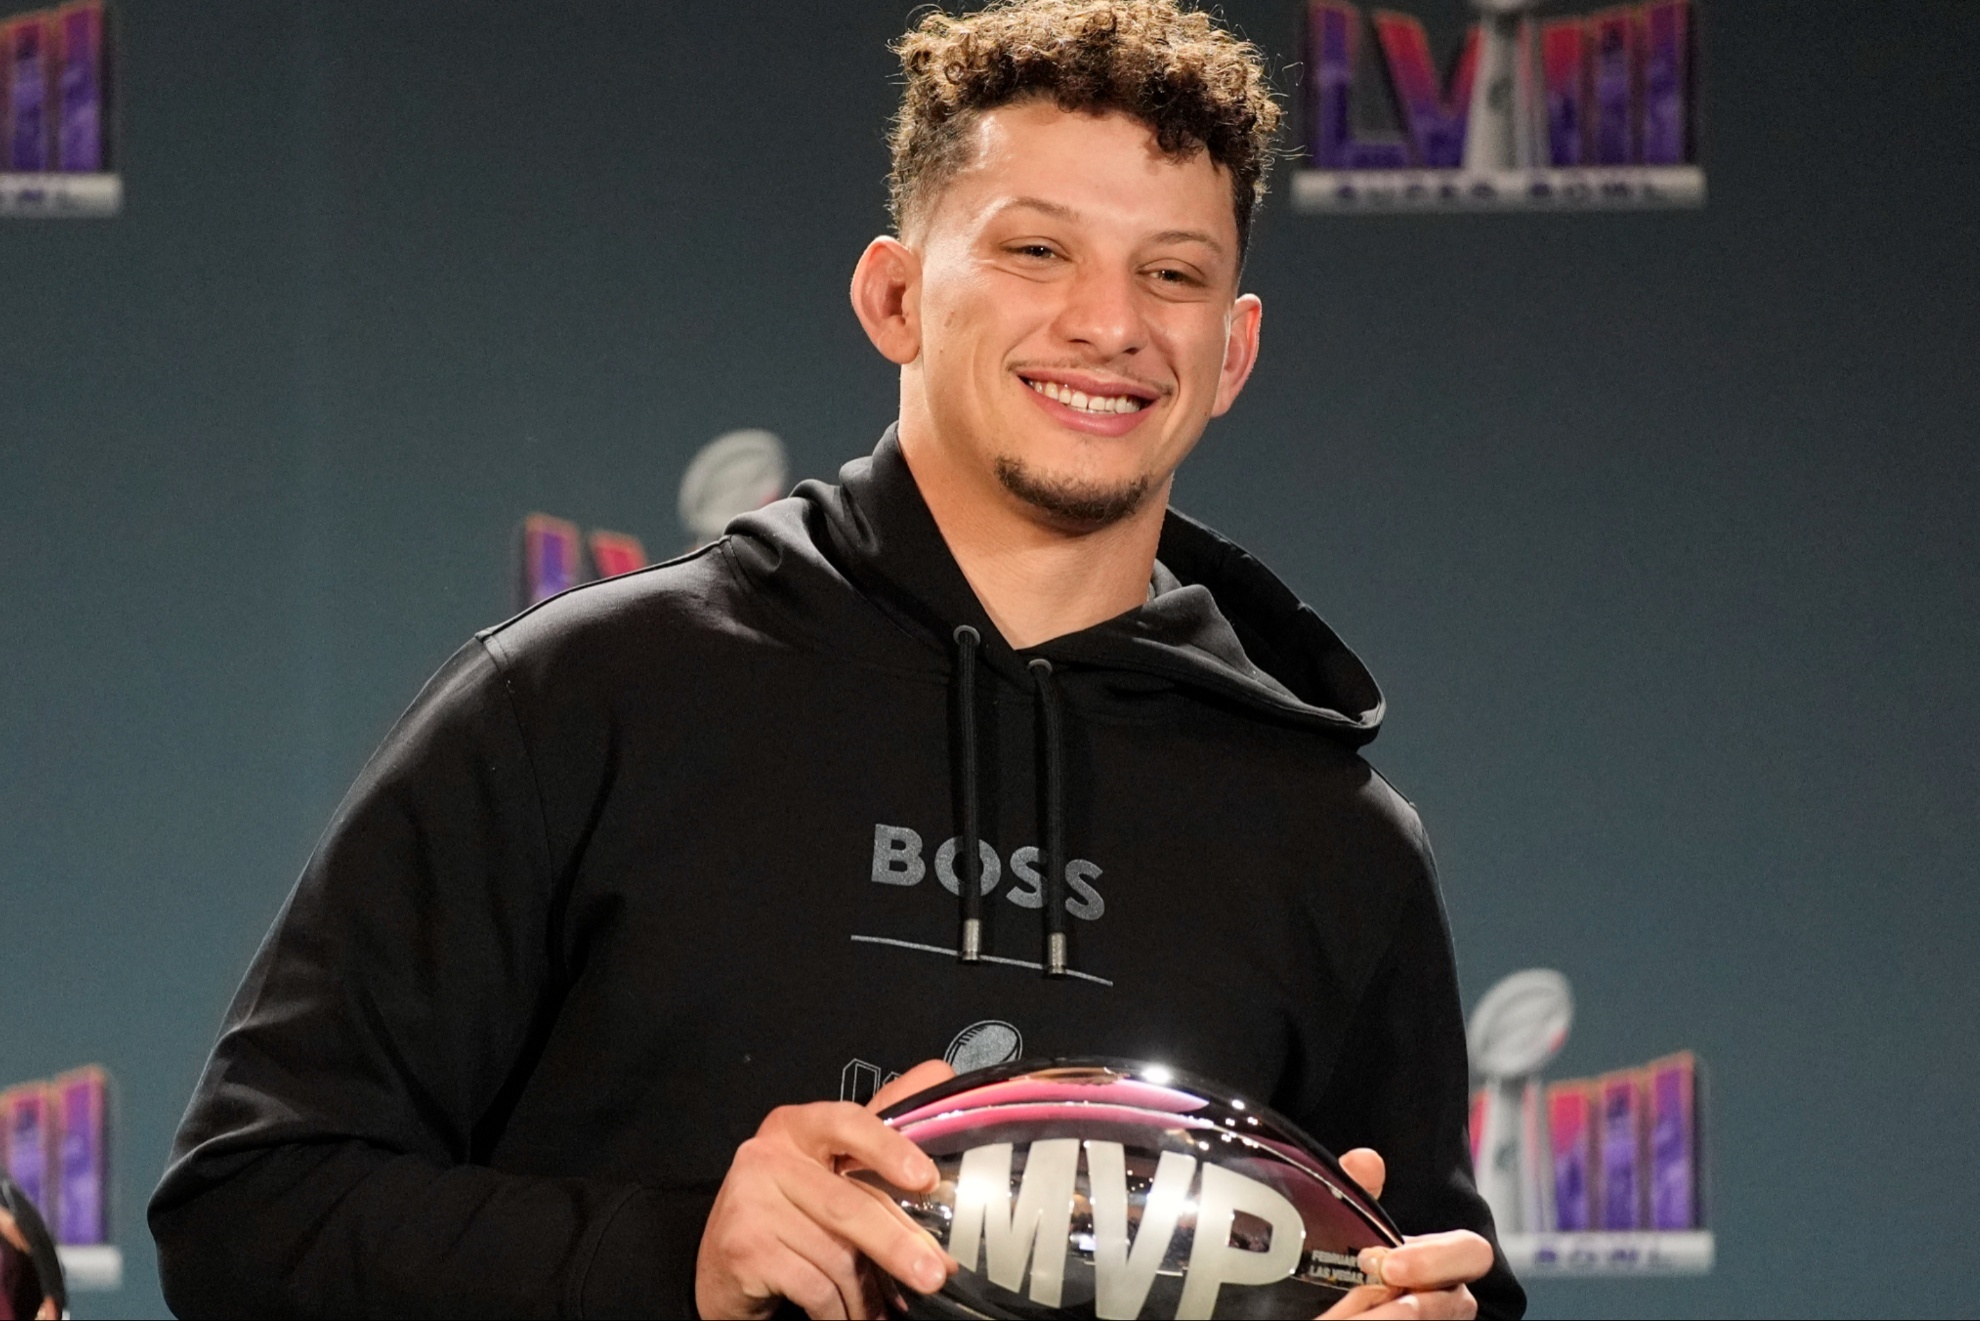 Patrick Mahomes shows his humility and acknowledges he's nowhere near GOAT status... yet